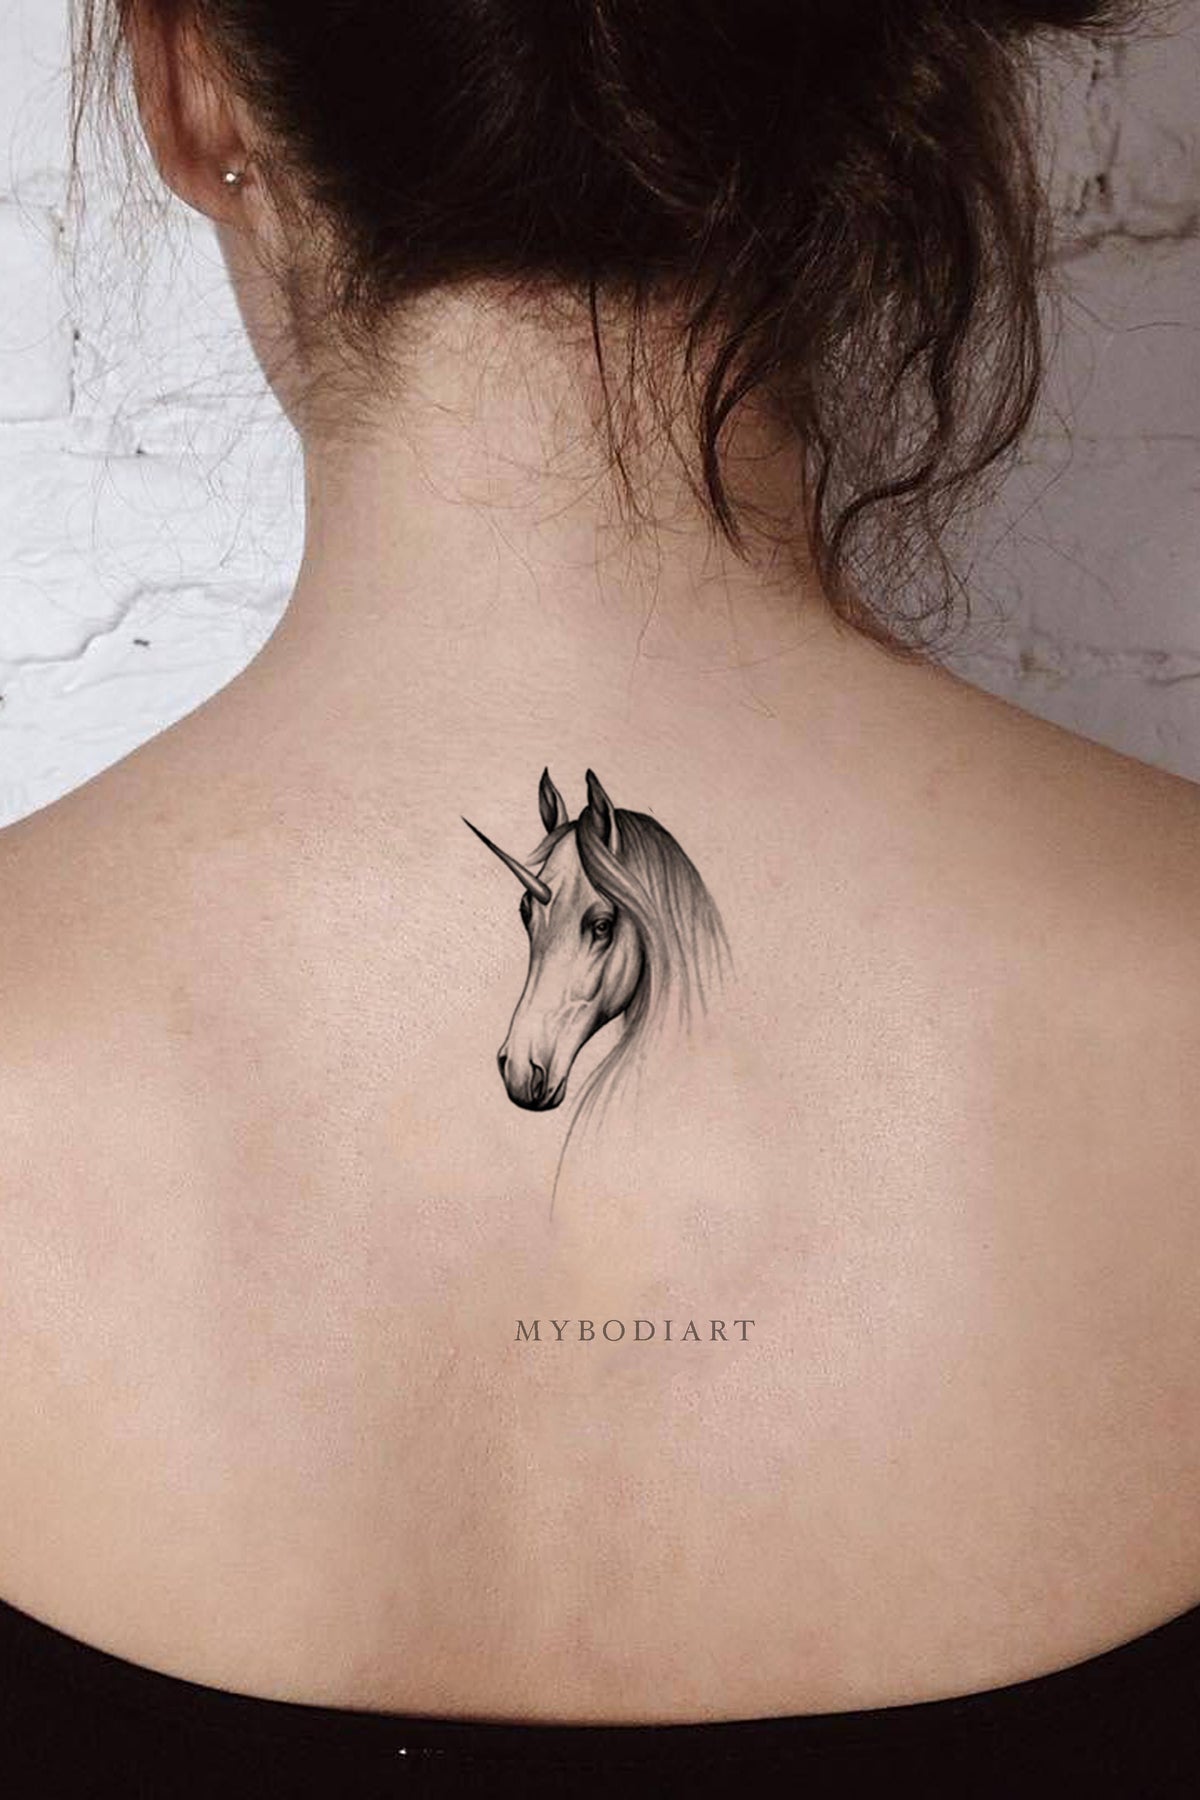 40 Inspiring Unicorn Tattoos with Meaning | Art and Design